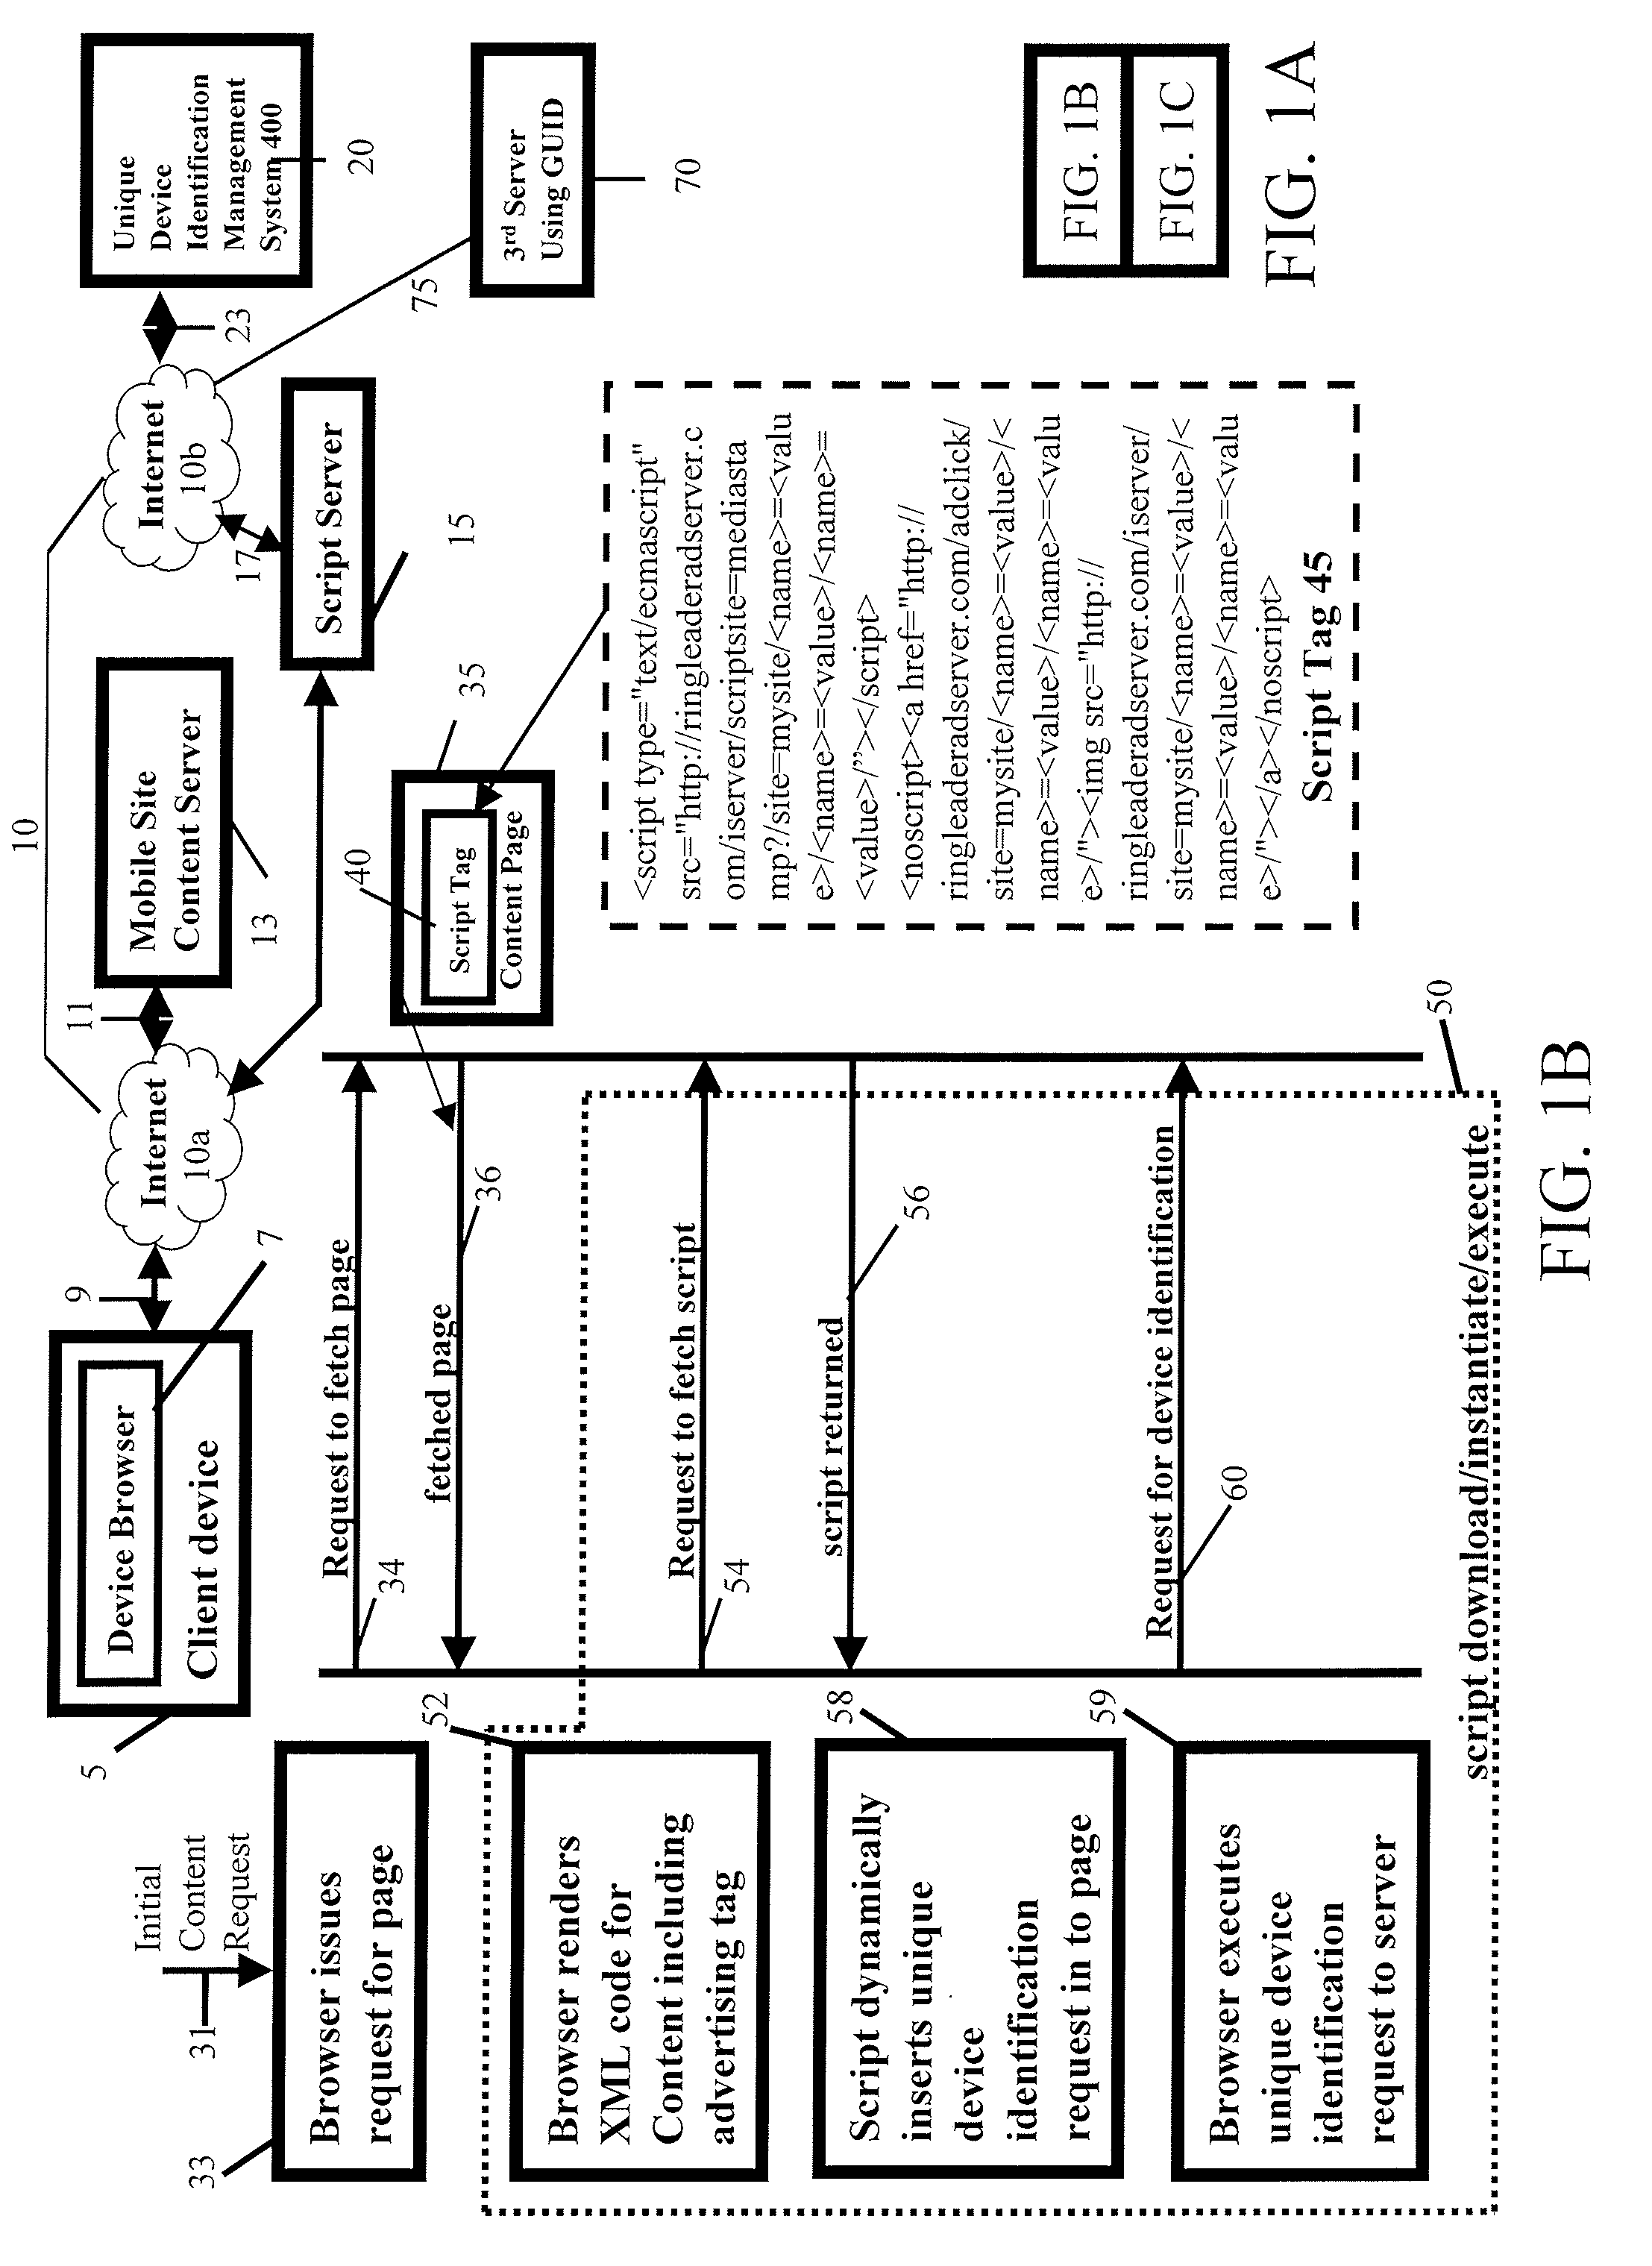 User-transparent system for uniquely identifying network-distributed devices without explicitly provided device or user identifying information